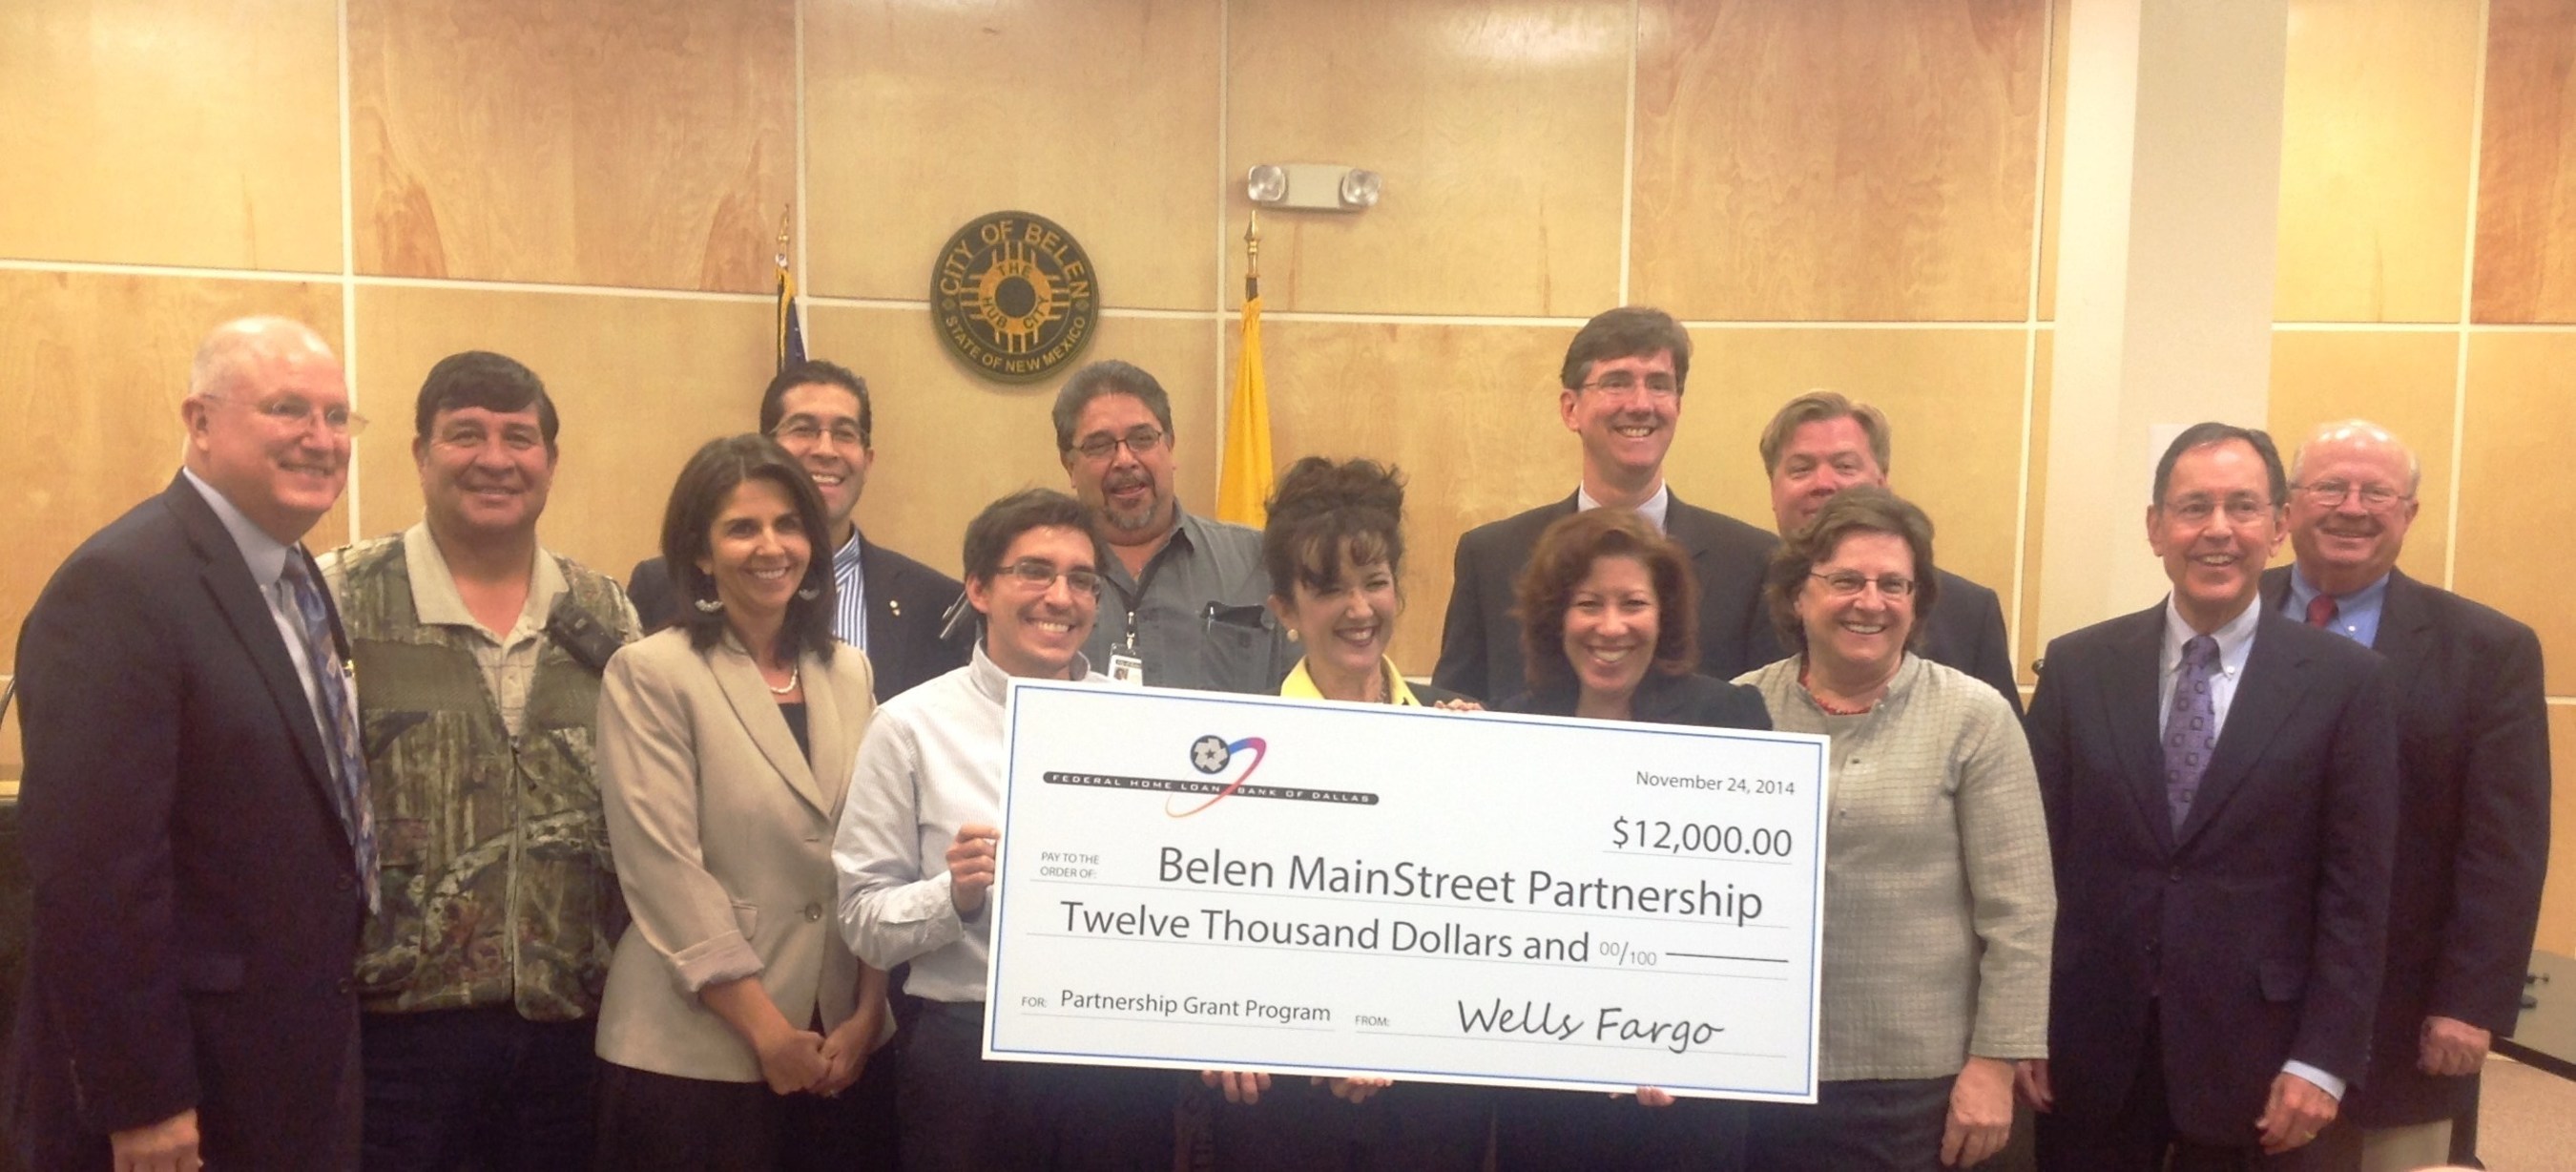 The Belen MainStreet Partnership, a nonprofit organization working with public and private sectors of Belen, New Mexico, received a $12,000 Partnership Grant Program (PGP) award November 24, 2014, from Wells Fargo and the Federal Home Loan Bank of Dallas. The funding will support administrative costs within the Belen MainStreet Partnership program and fund special projects in the community.